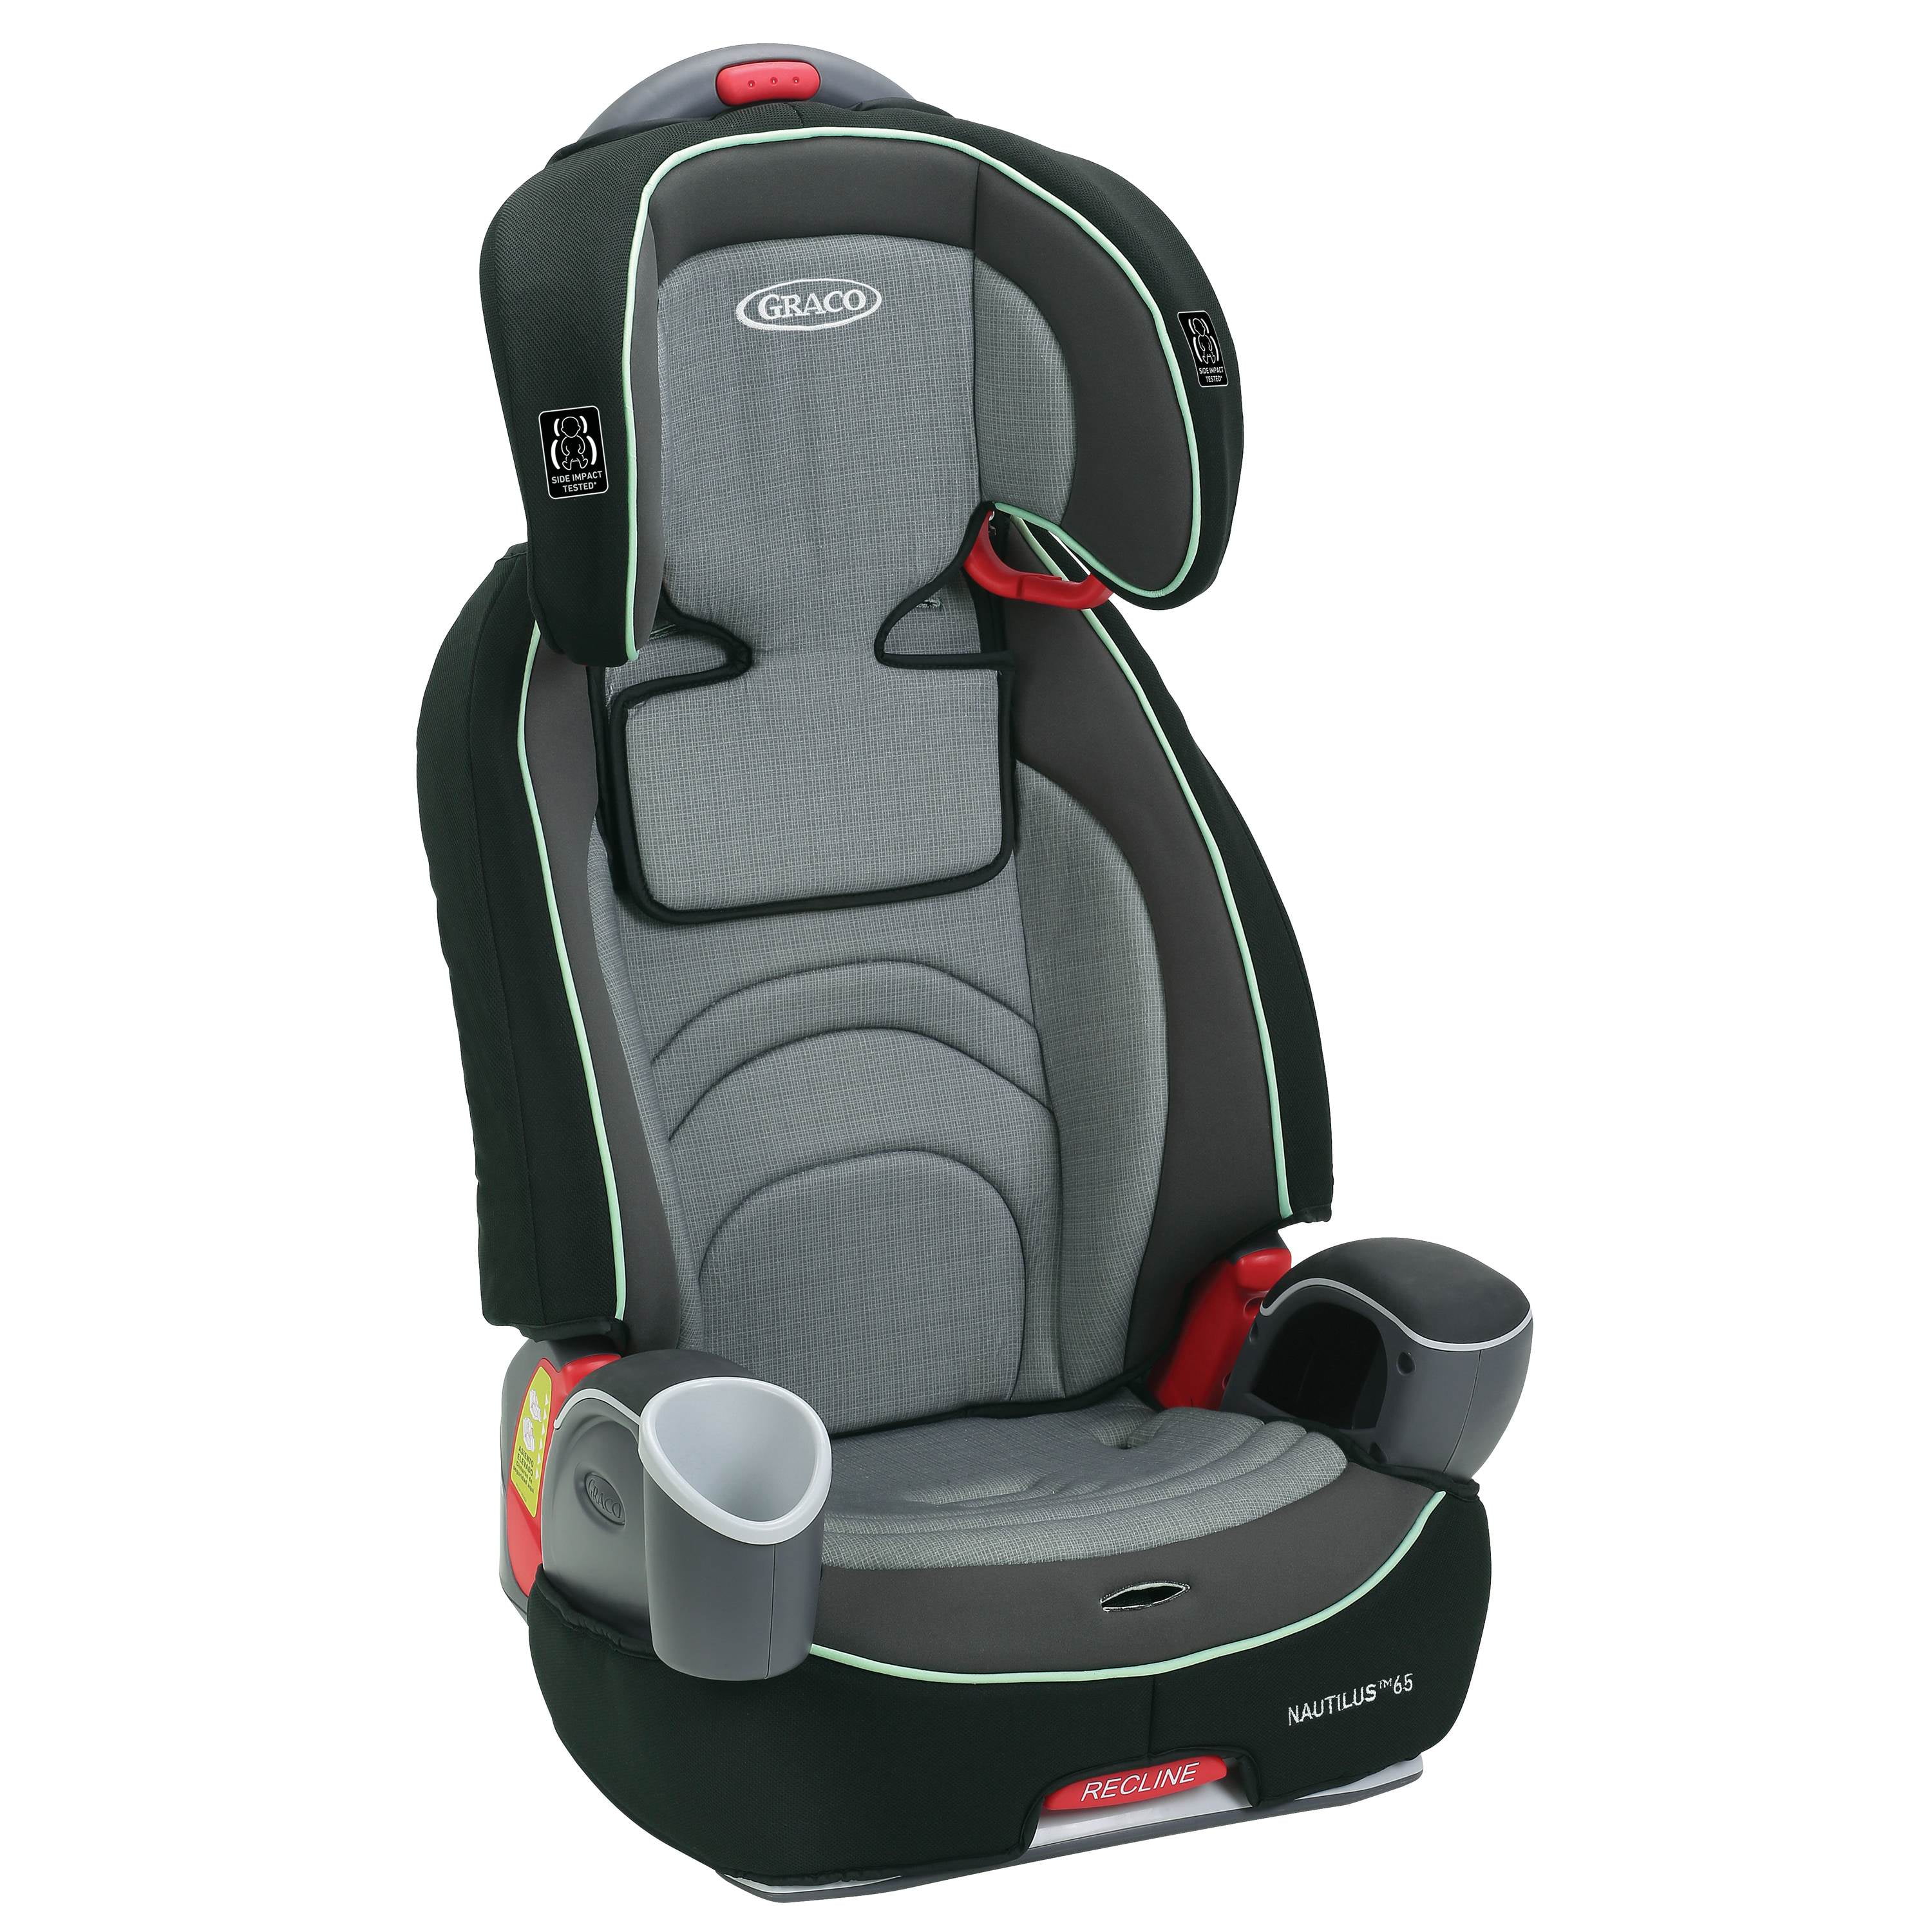 Graco Nautilus 65 3-in-1 Harness Booster Car Seat Sully One Size 